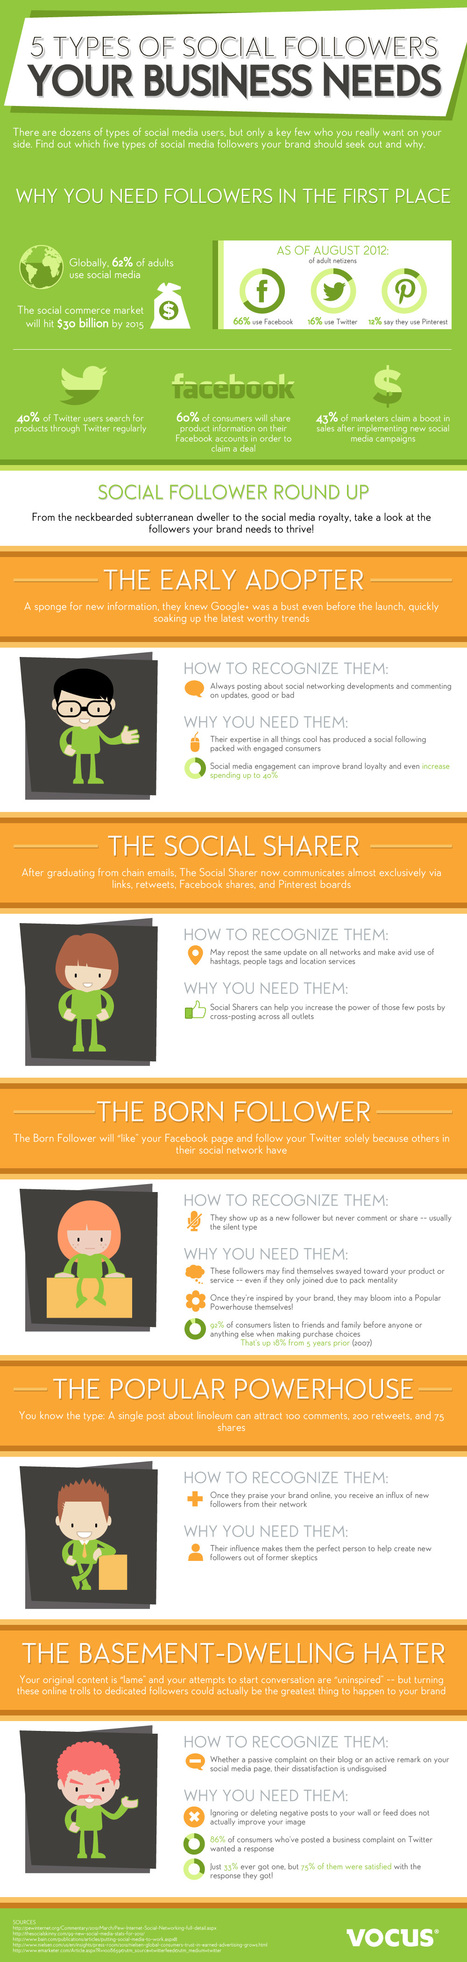 The 5 Types of Social Followers that Every Business Needs [INFOGRAPHIC] | business analyst | Scoop.it